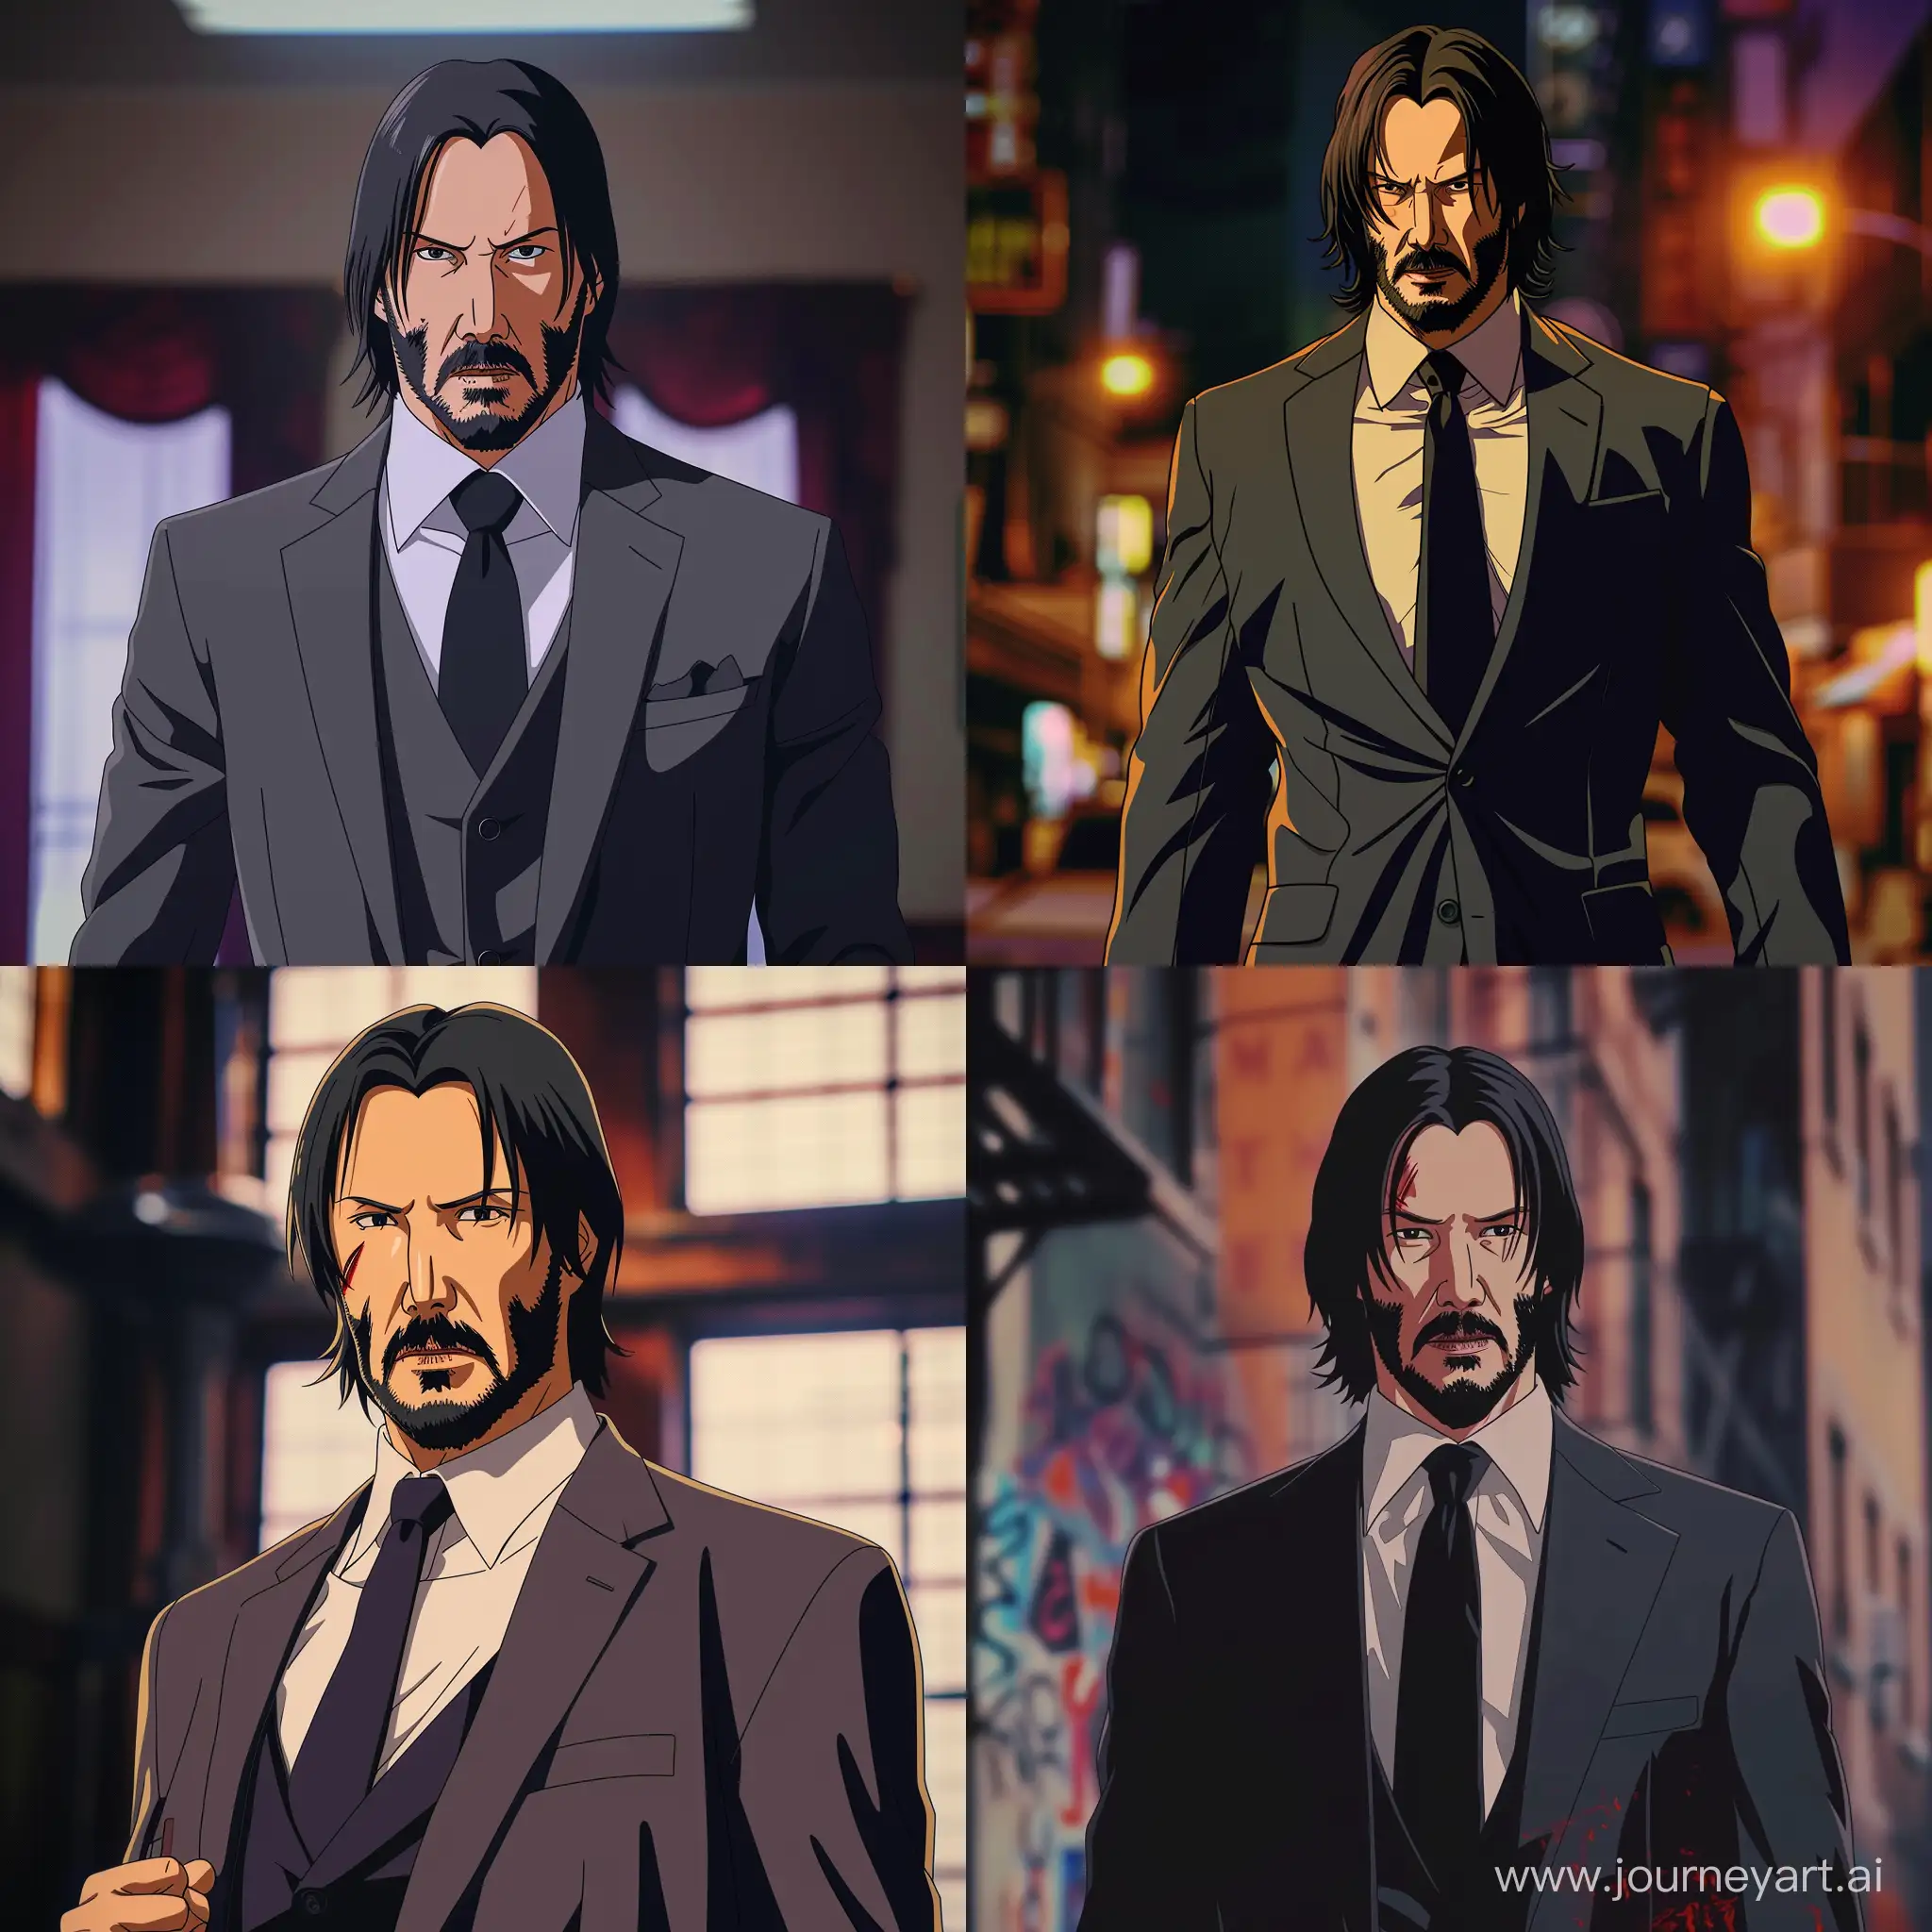 John-Wick-in-80s-Anime-Style-Suit-ActionPacked-Still